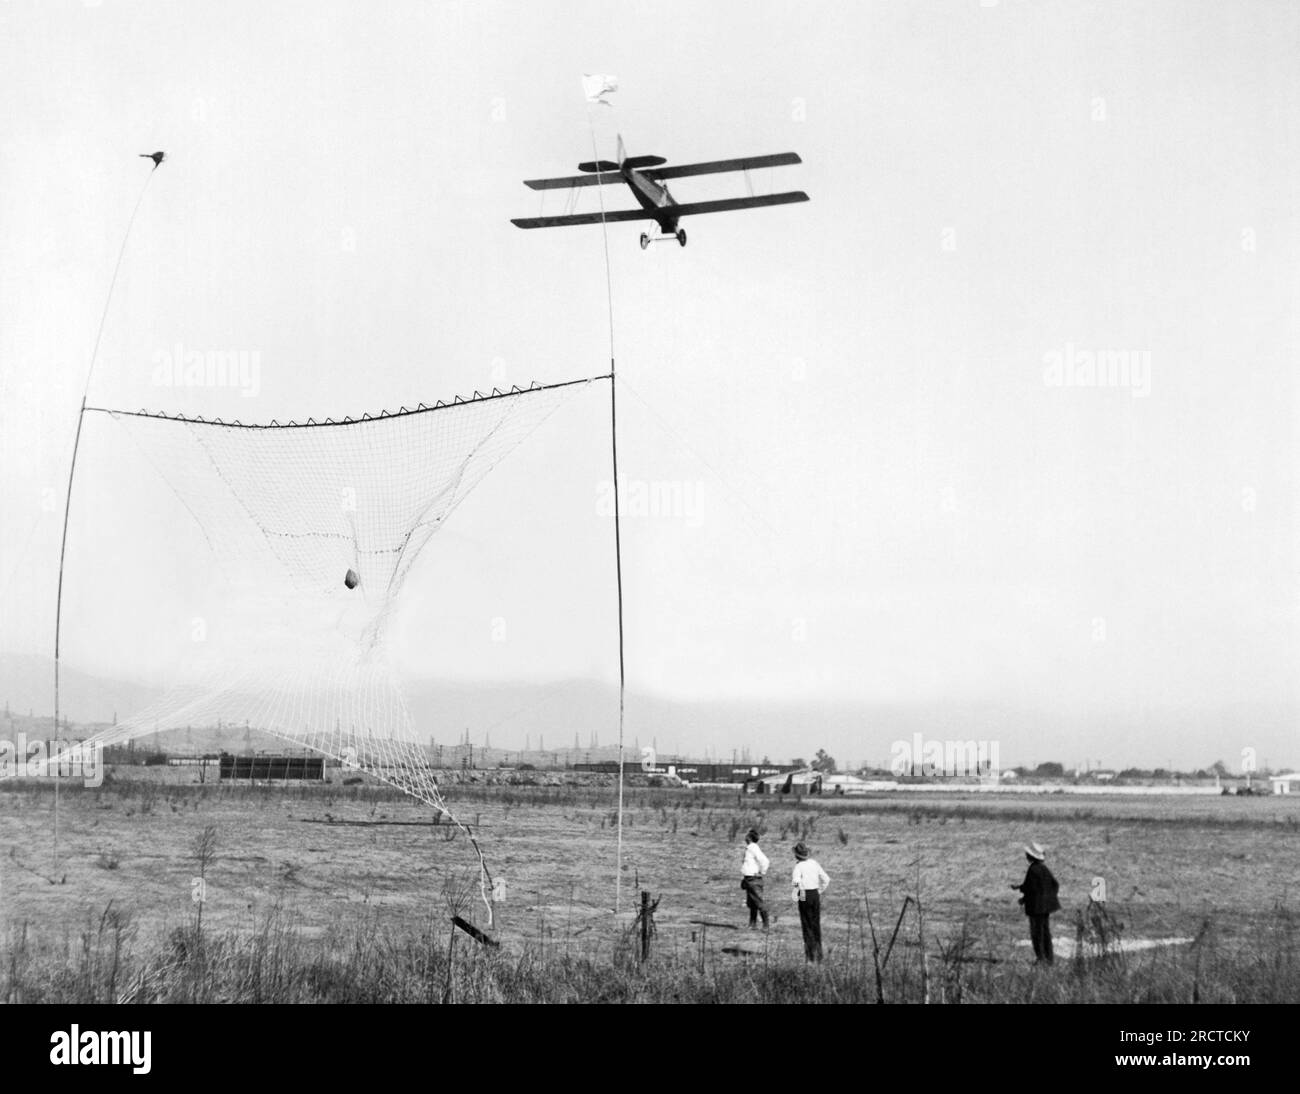 Whittier, California:  c. 1926 A new invention for delivering air mail to airports has been proven to work. The mail sack is lowered down on a rope by the pilot and carried into a 40' x 40' net that is equipped with a series of sharp knives on the upper rim, which cut the rope and the mail bag then rolls gently to the ground. Stock Photo